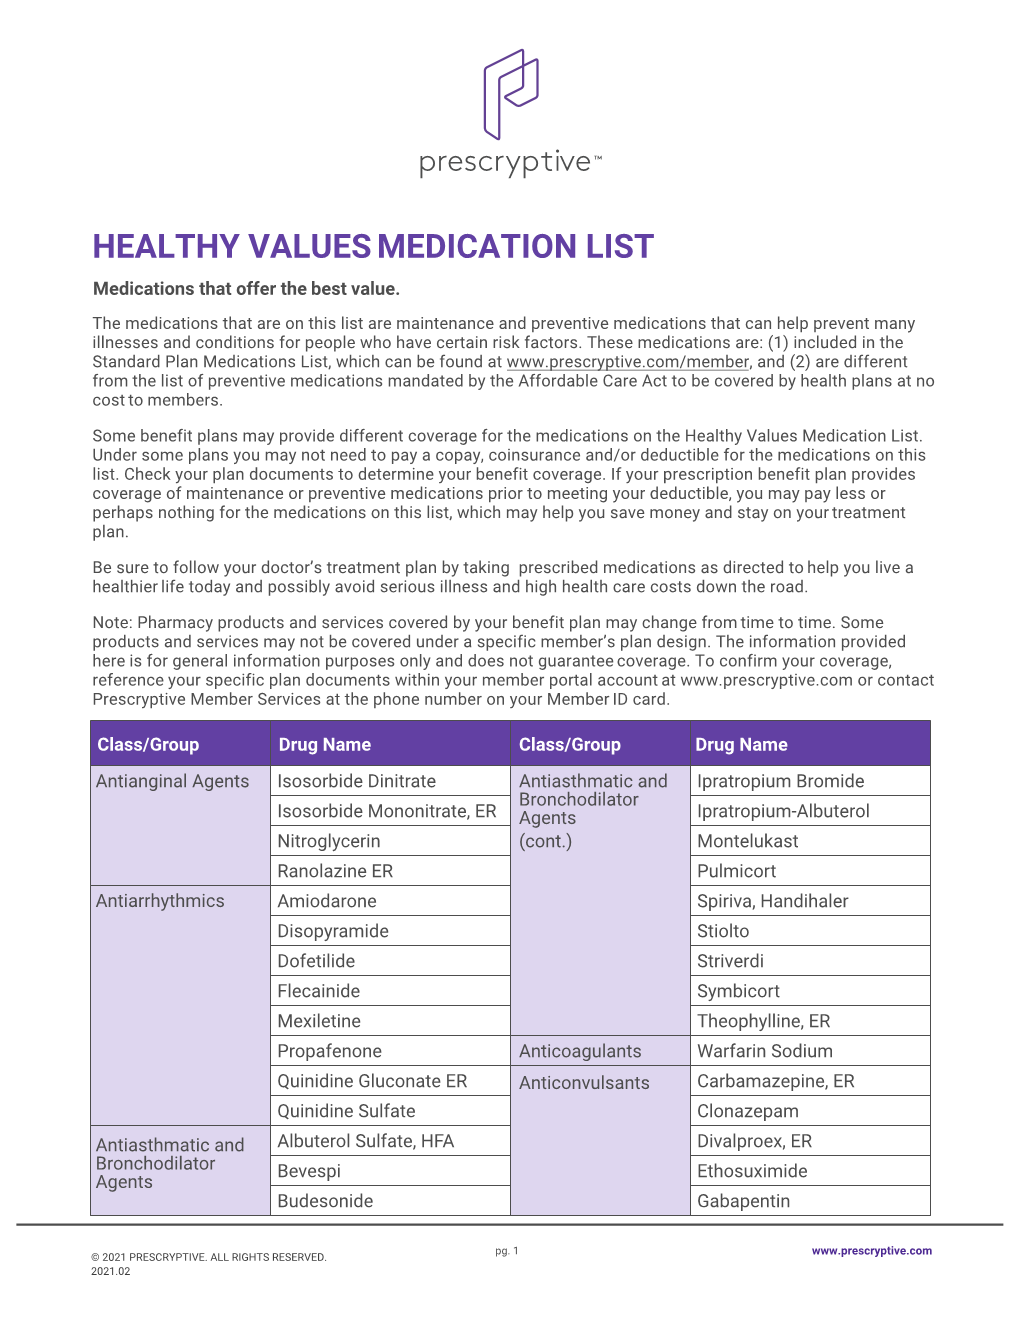 HEALTHY VALUES MEDICATION LIST Medications That Offer the Best Value